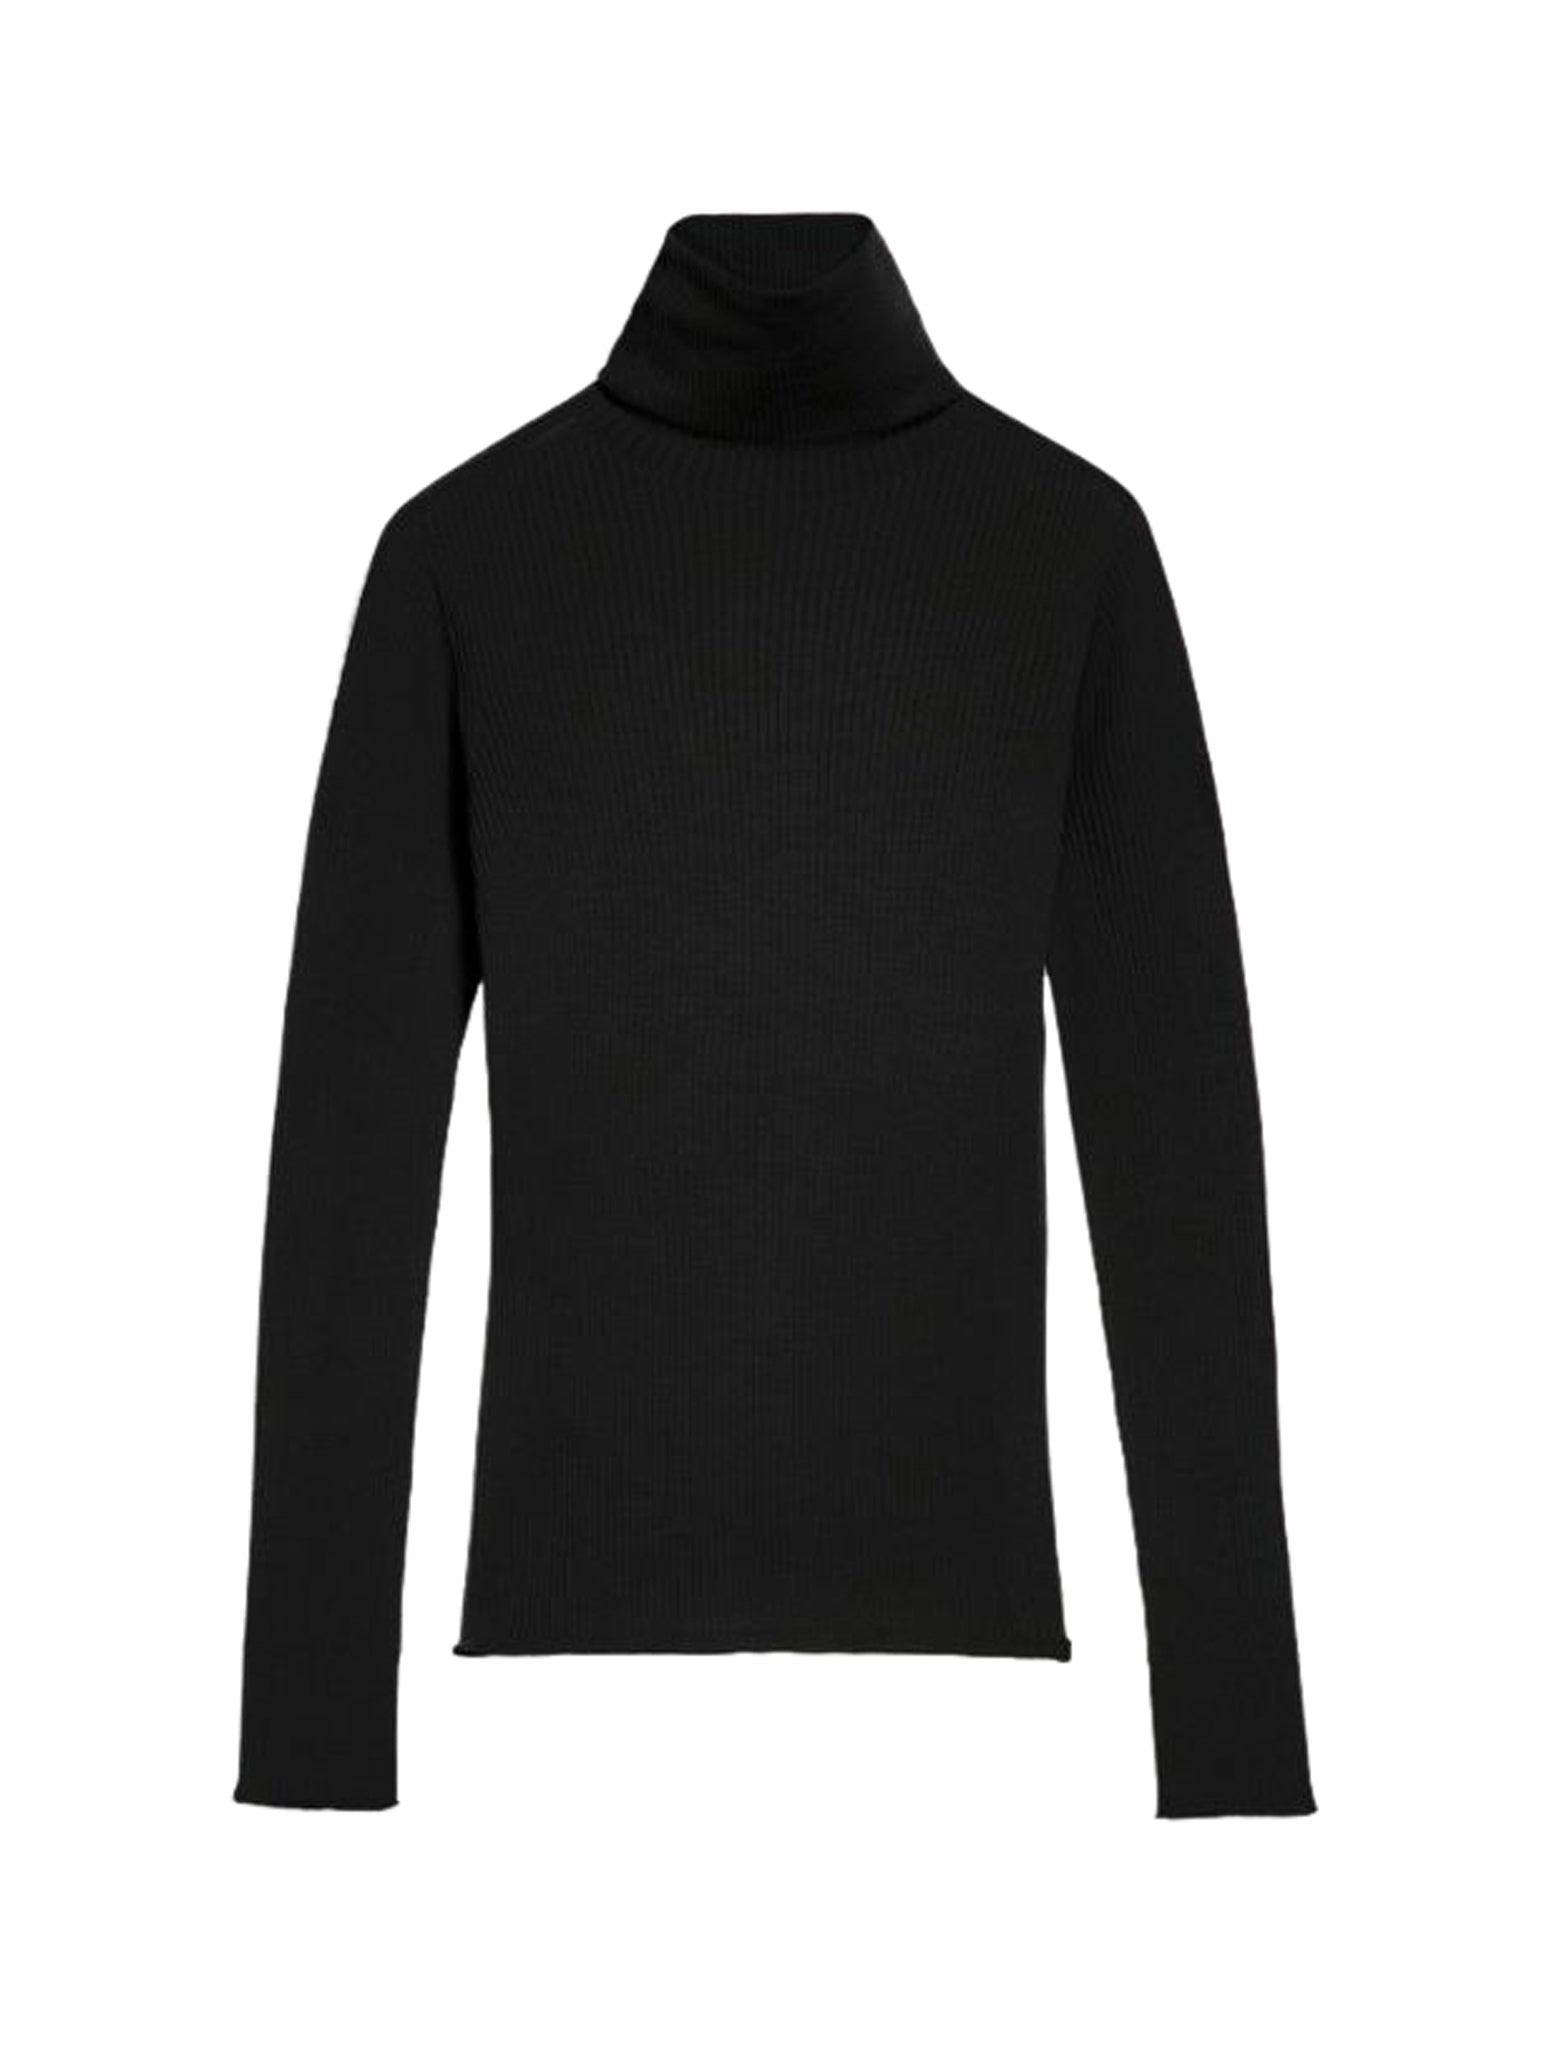 Mock neck sweater with contrasting stripes